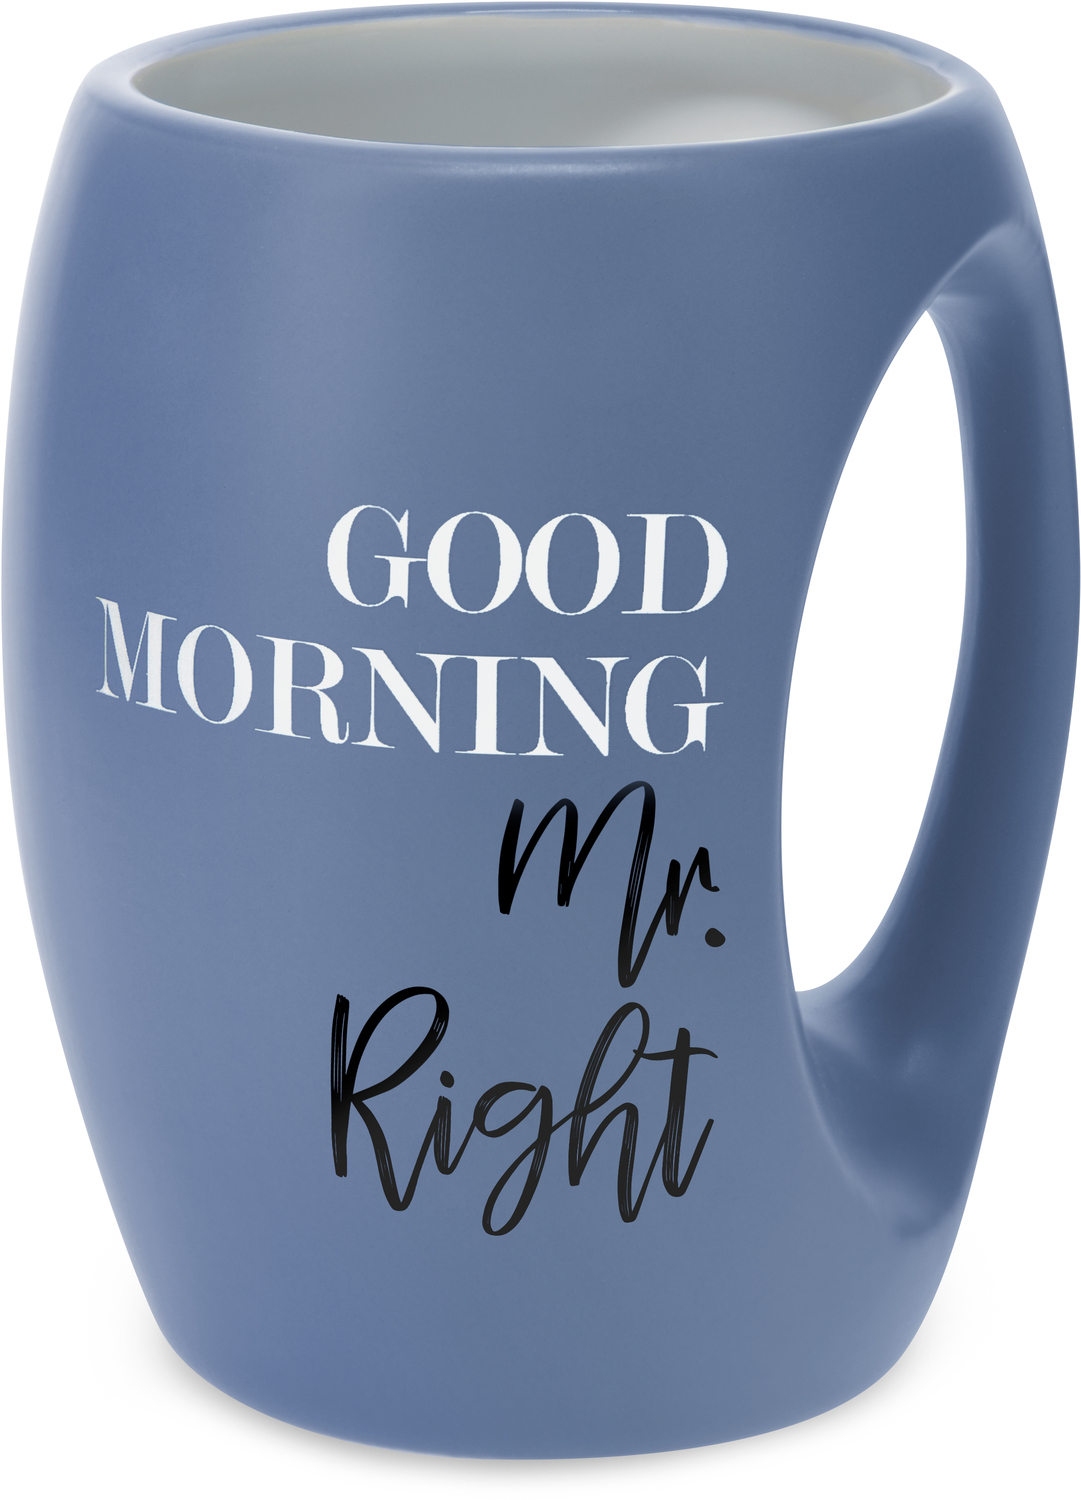 Mr. Right by Good Morning - Mr. Right - 16 oz Cup